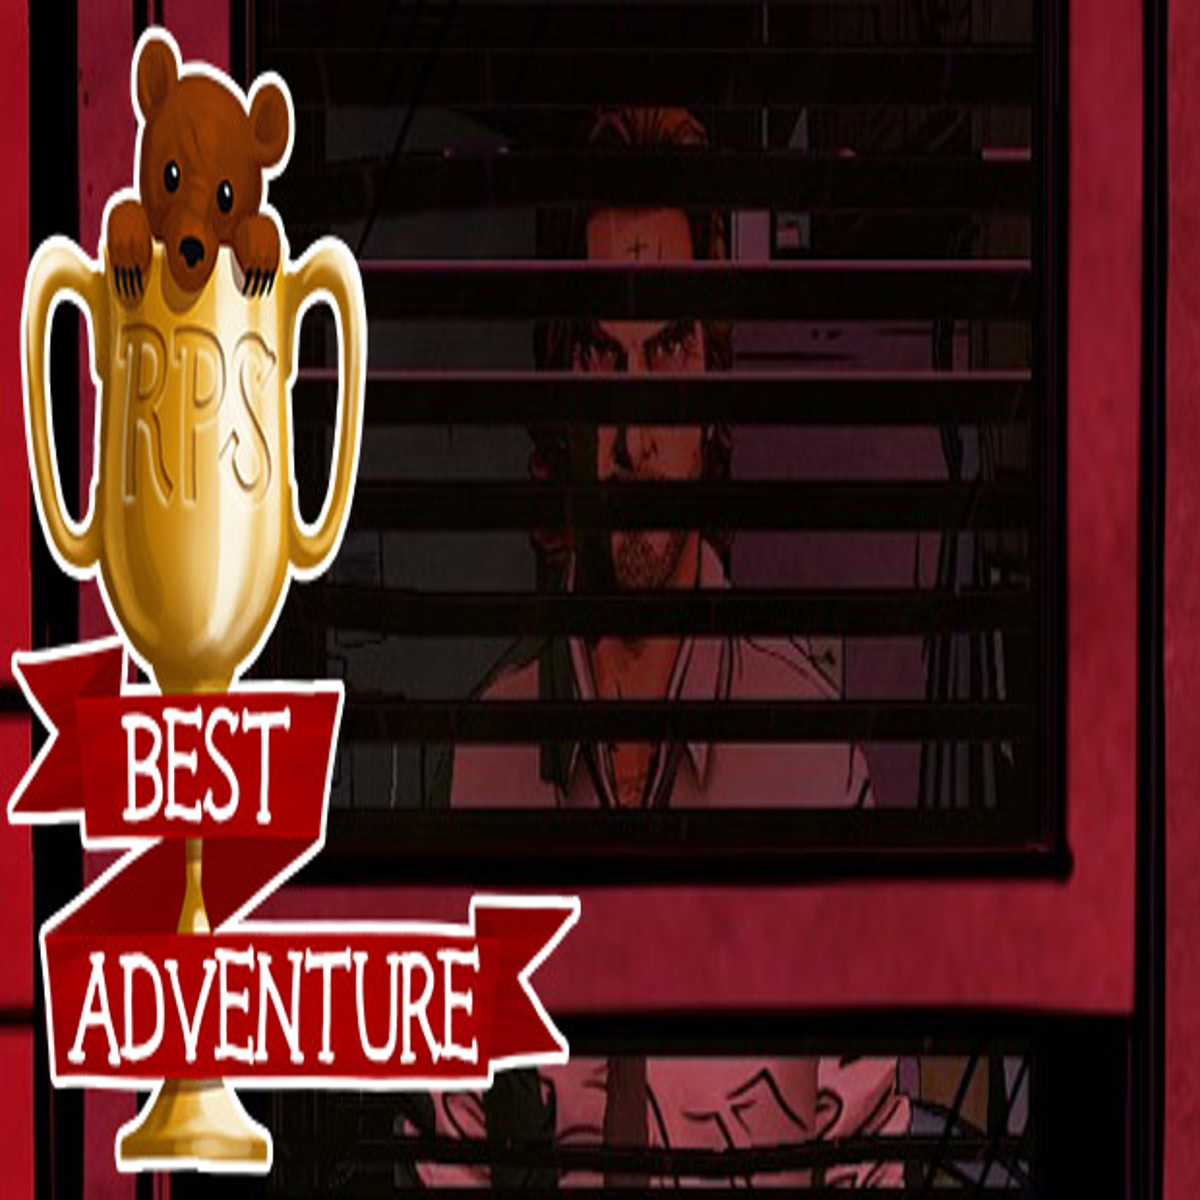 Telltale on X: #TheWolfAmongUs featured as 2014 GOTY Contender in